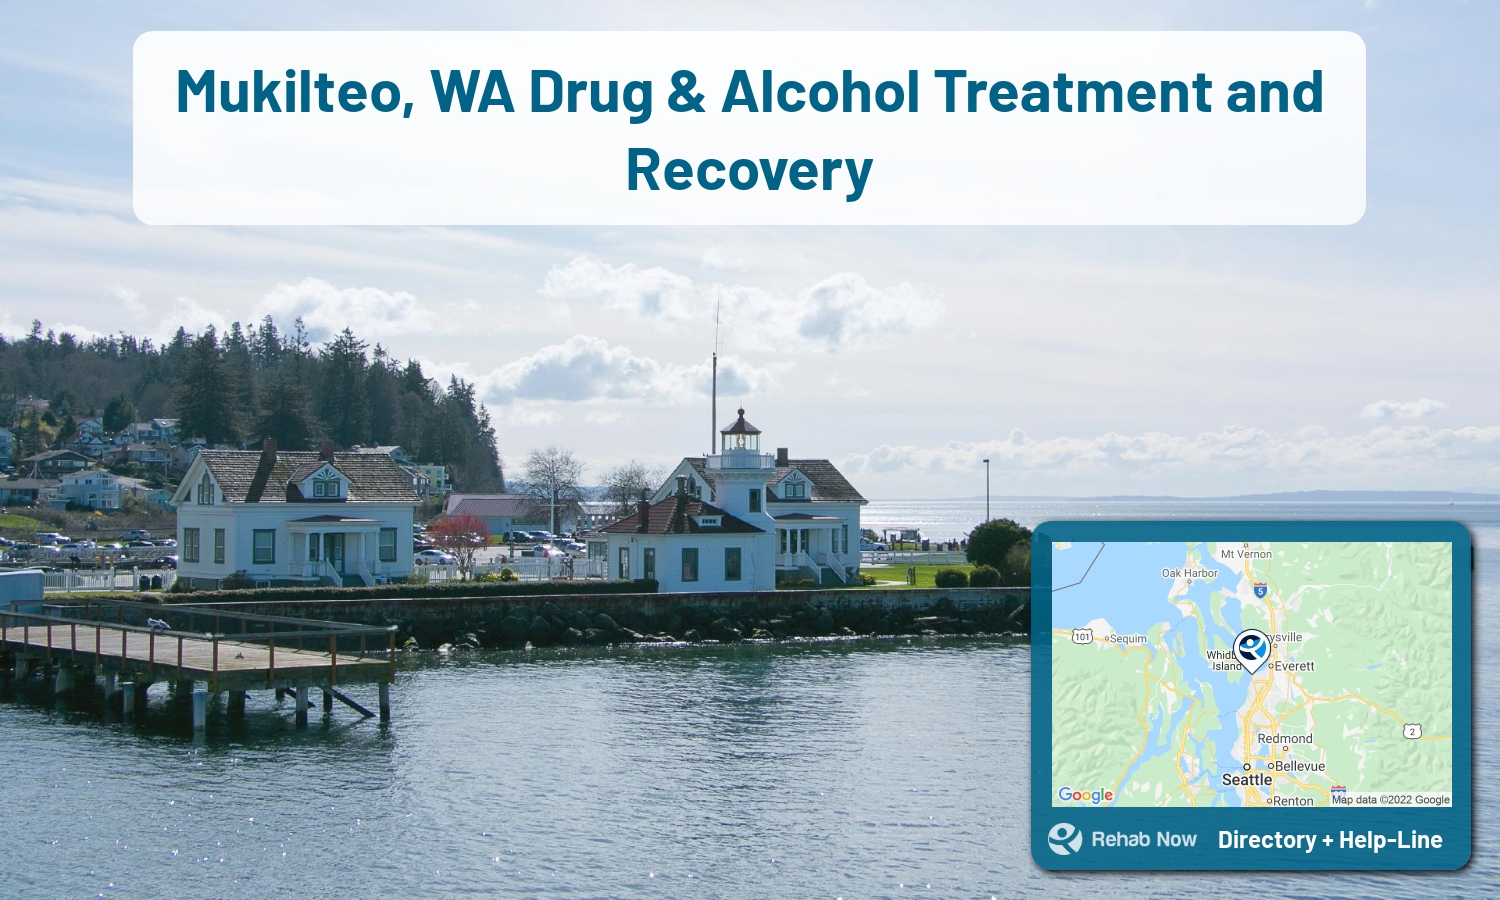 View options, availability, treatment methods, and more, for drug rehab and alcohol treatment in Mukilteo, Washington